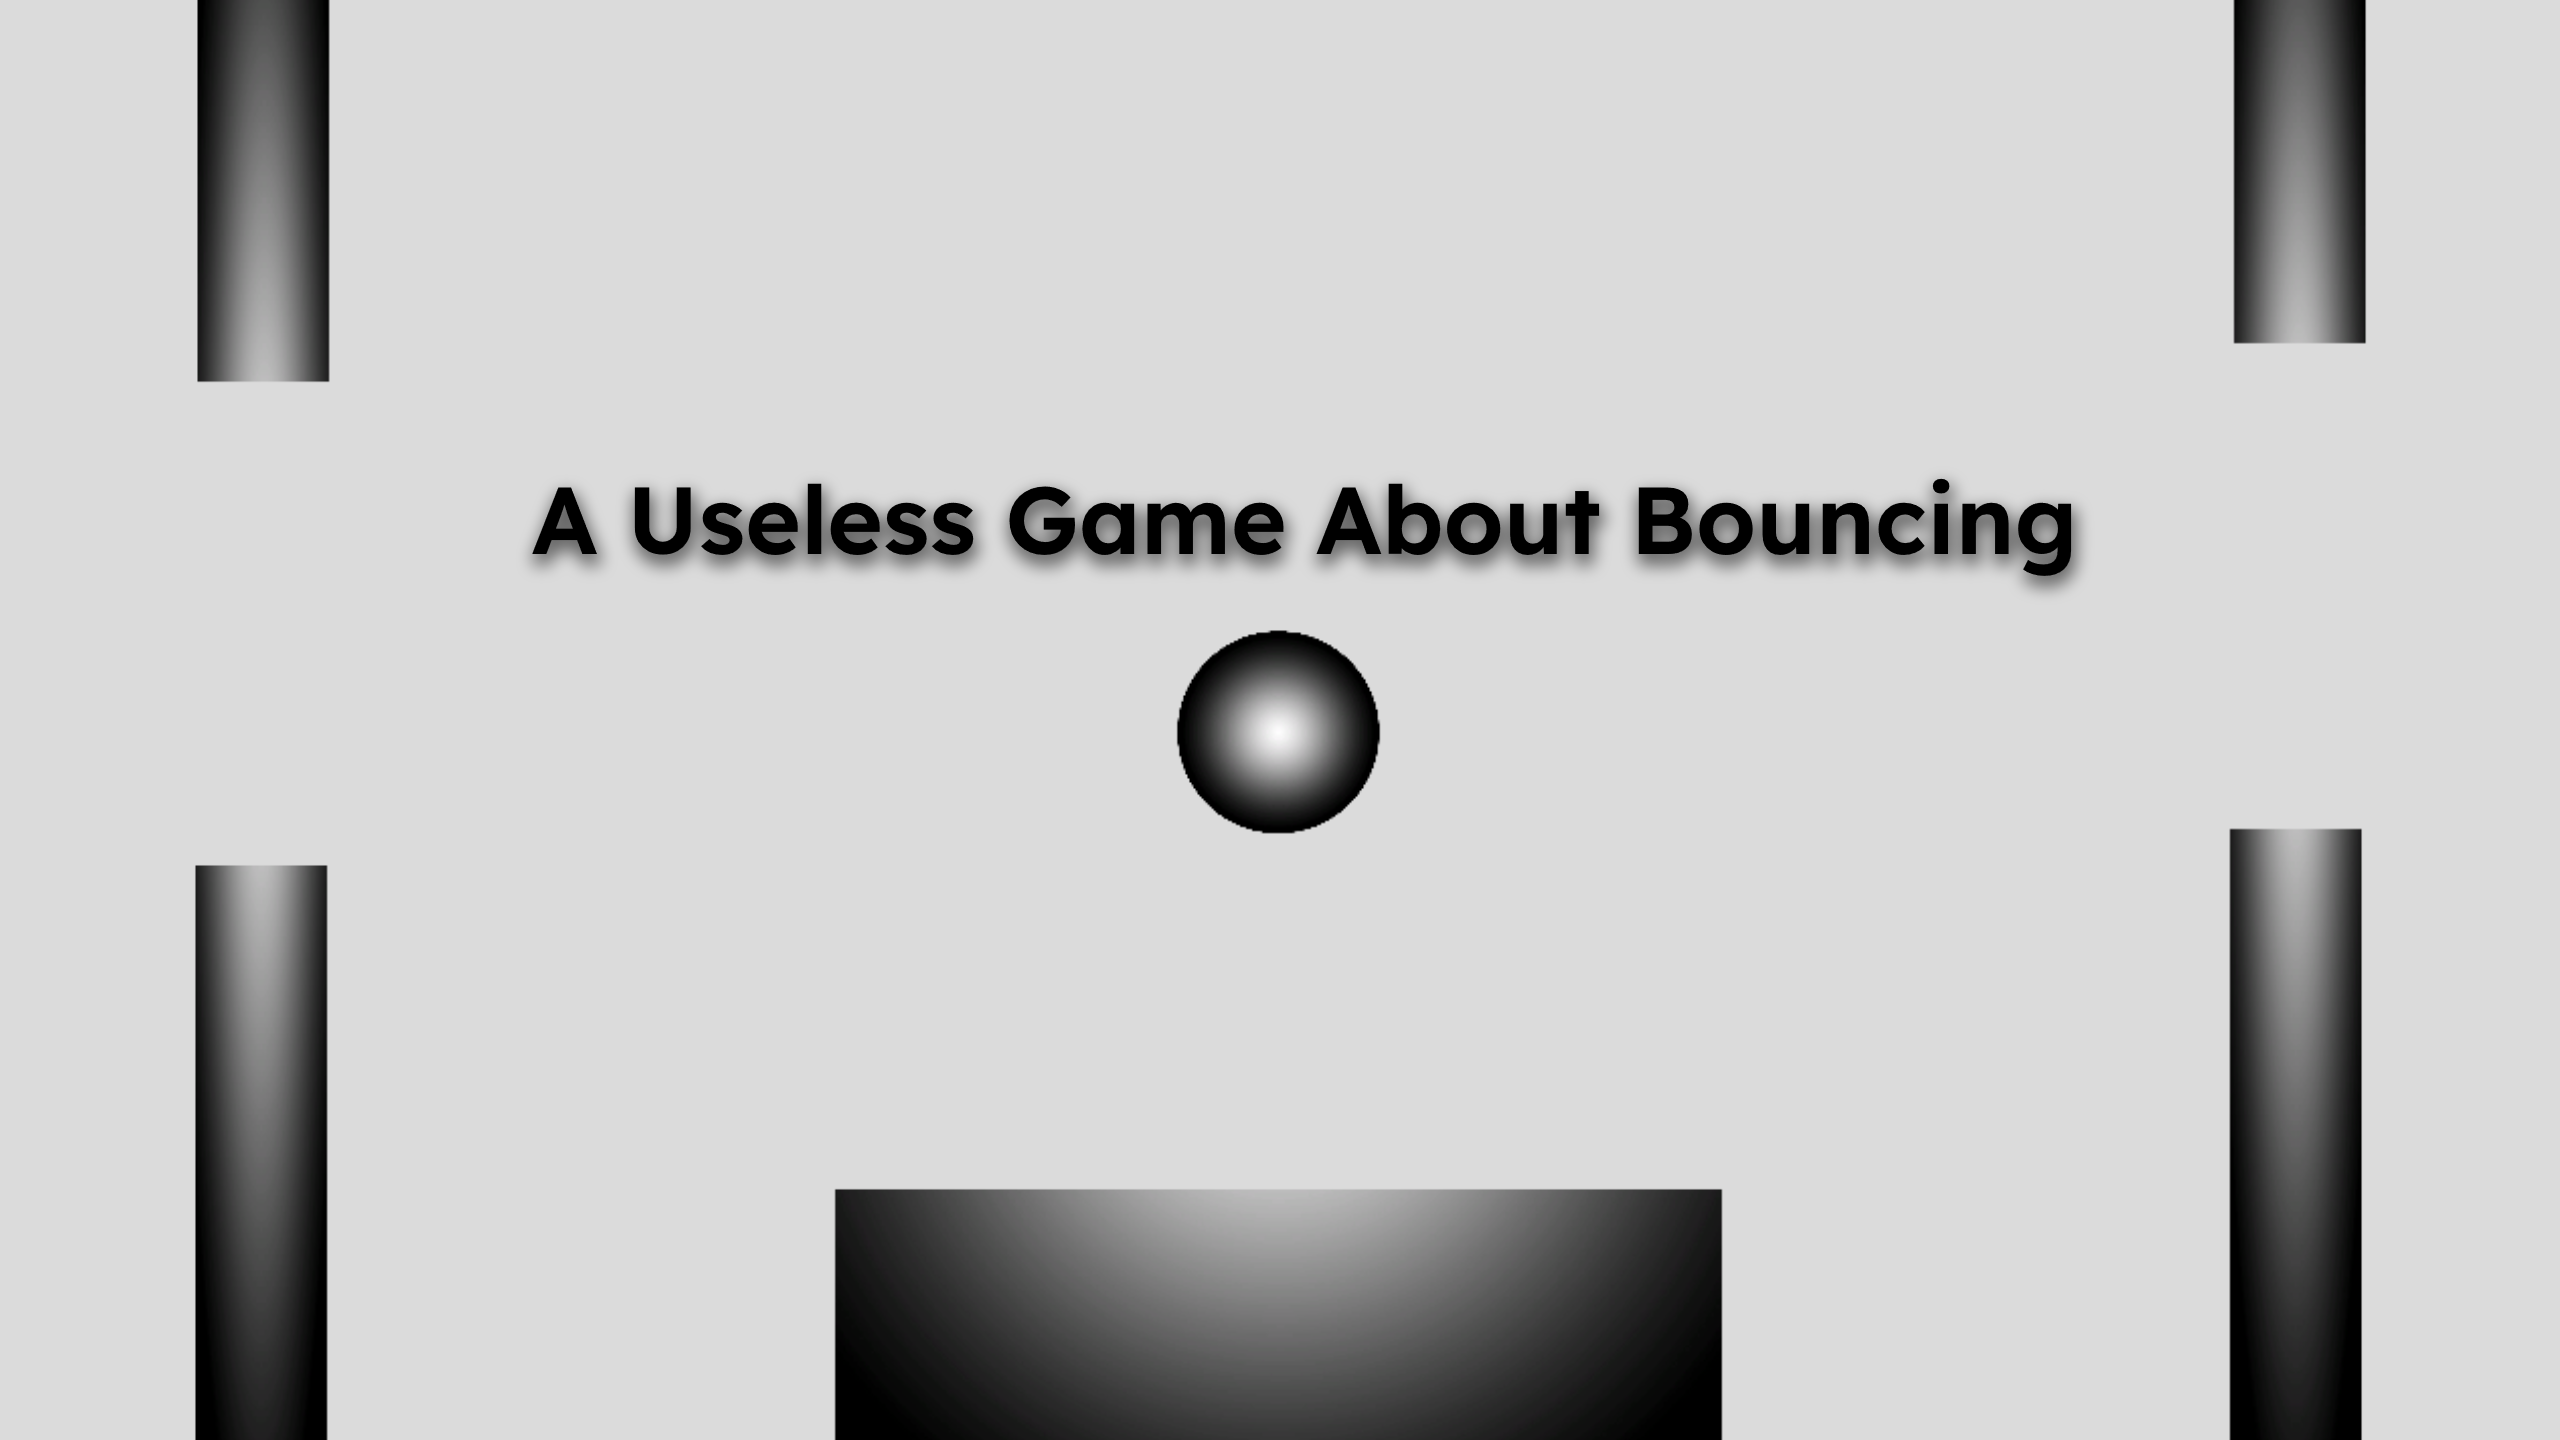 A Useless Game About Bouncing